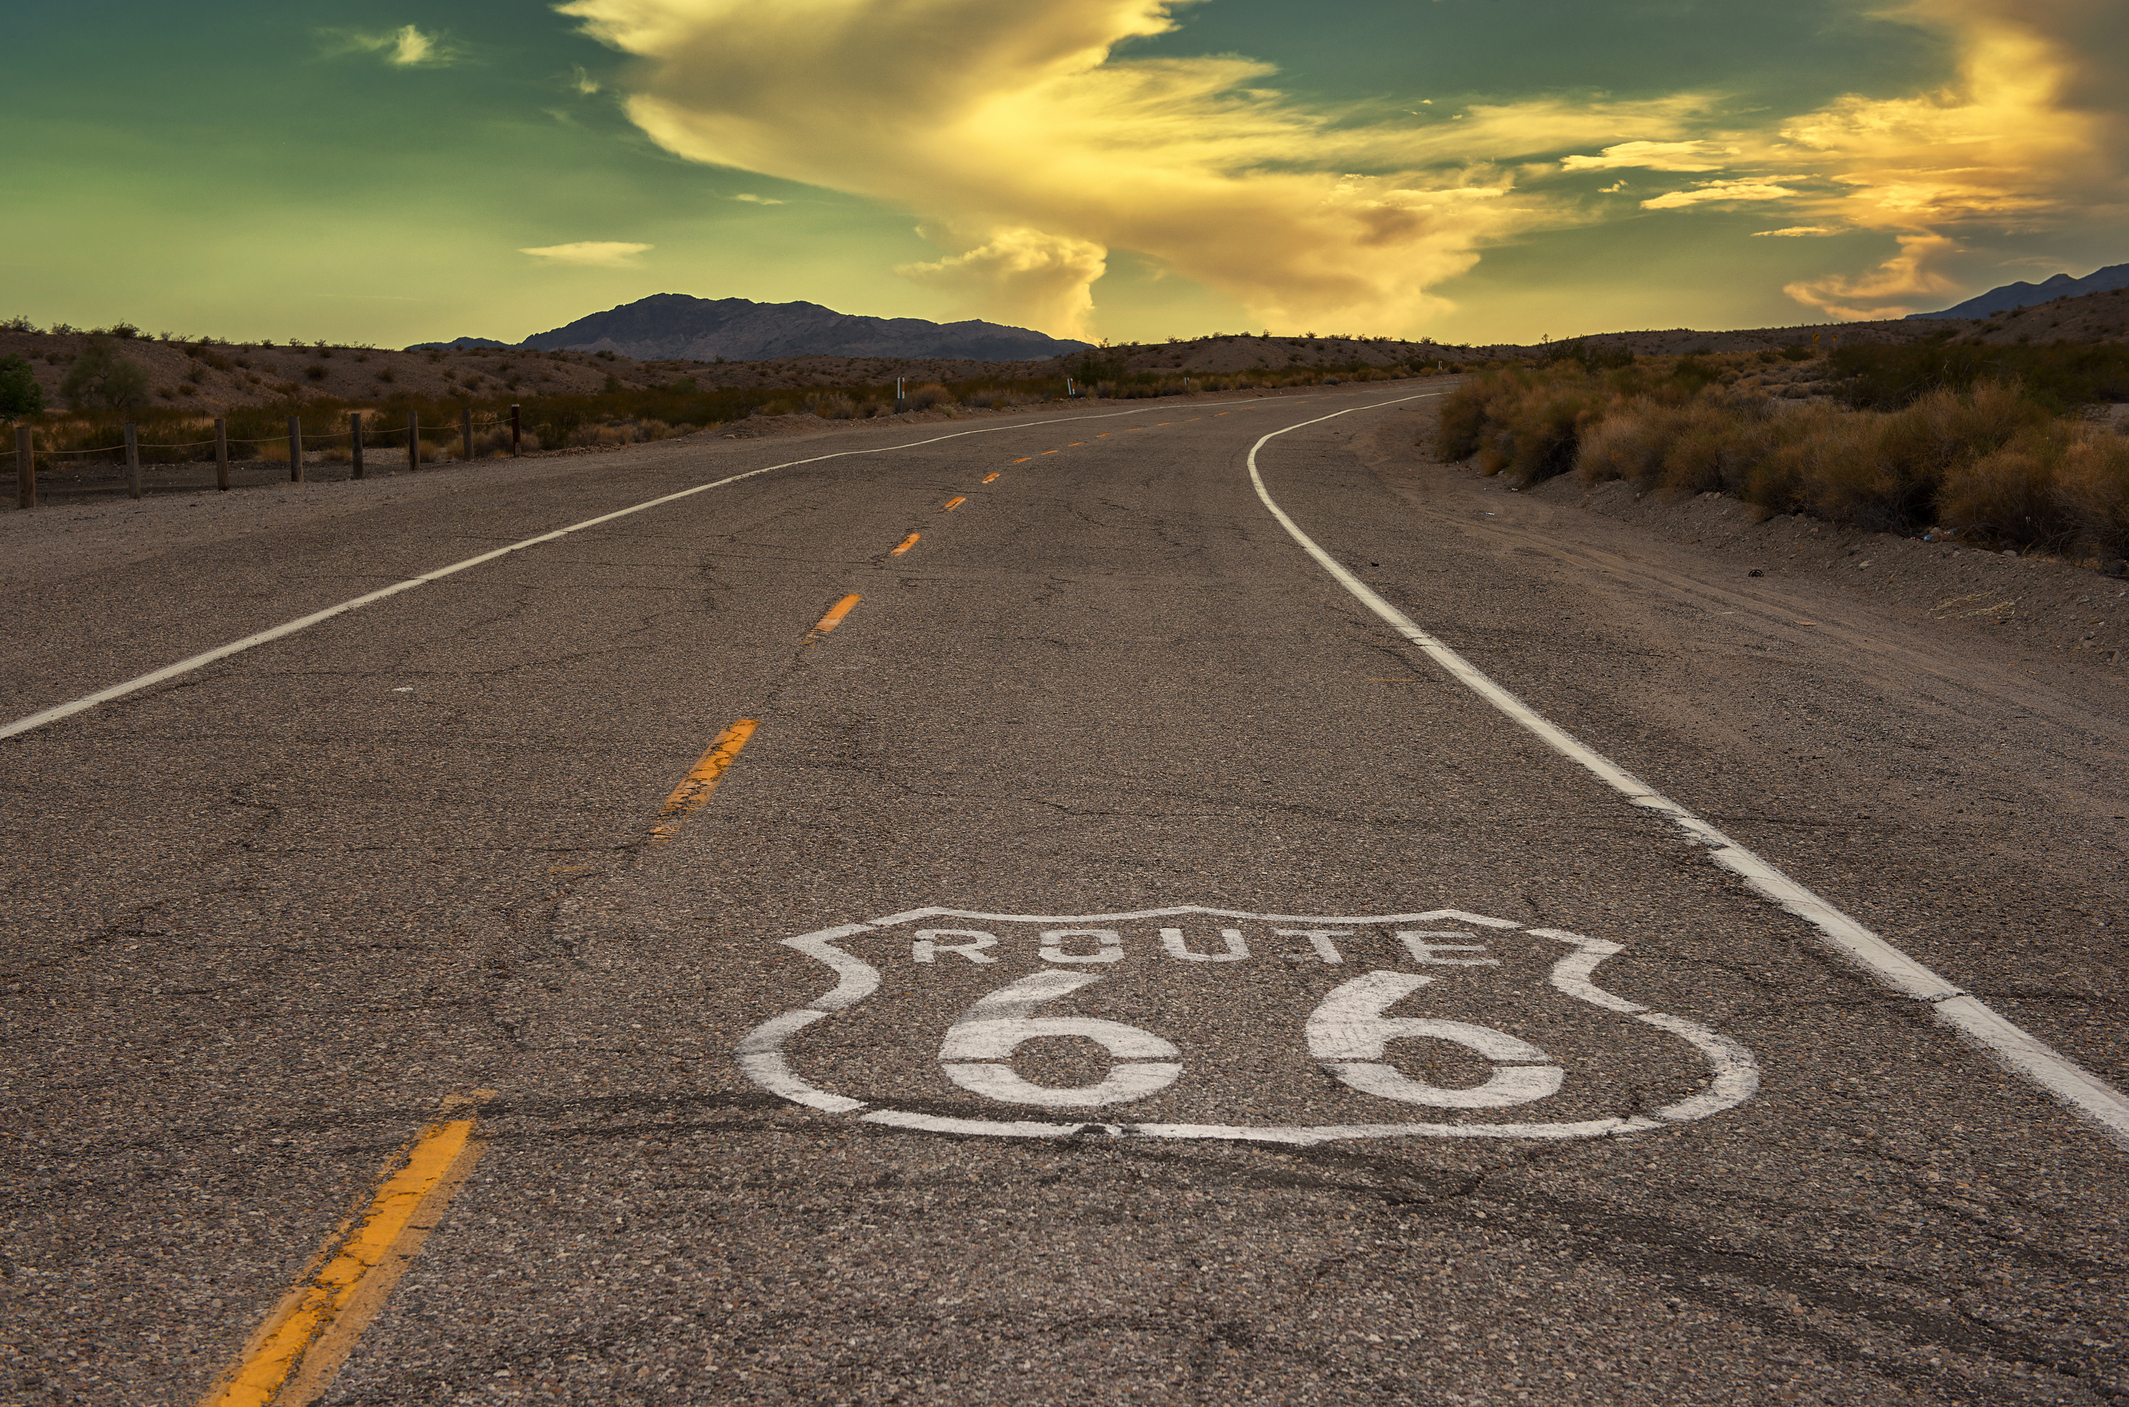 California: Historic Route 66 with marker on road at sunset - APRO